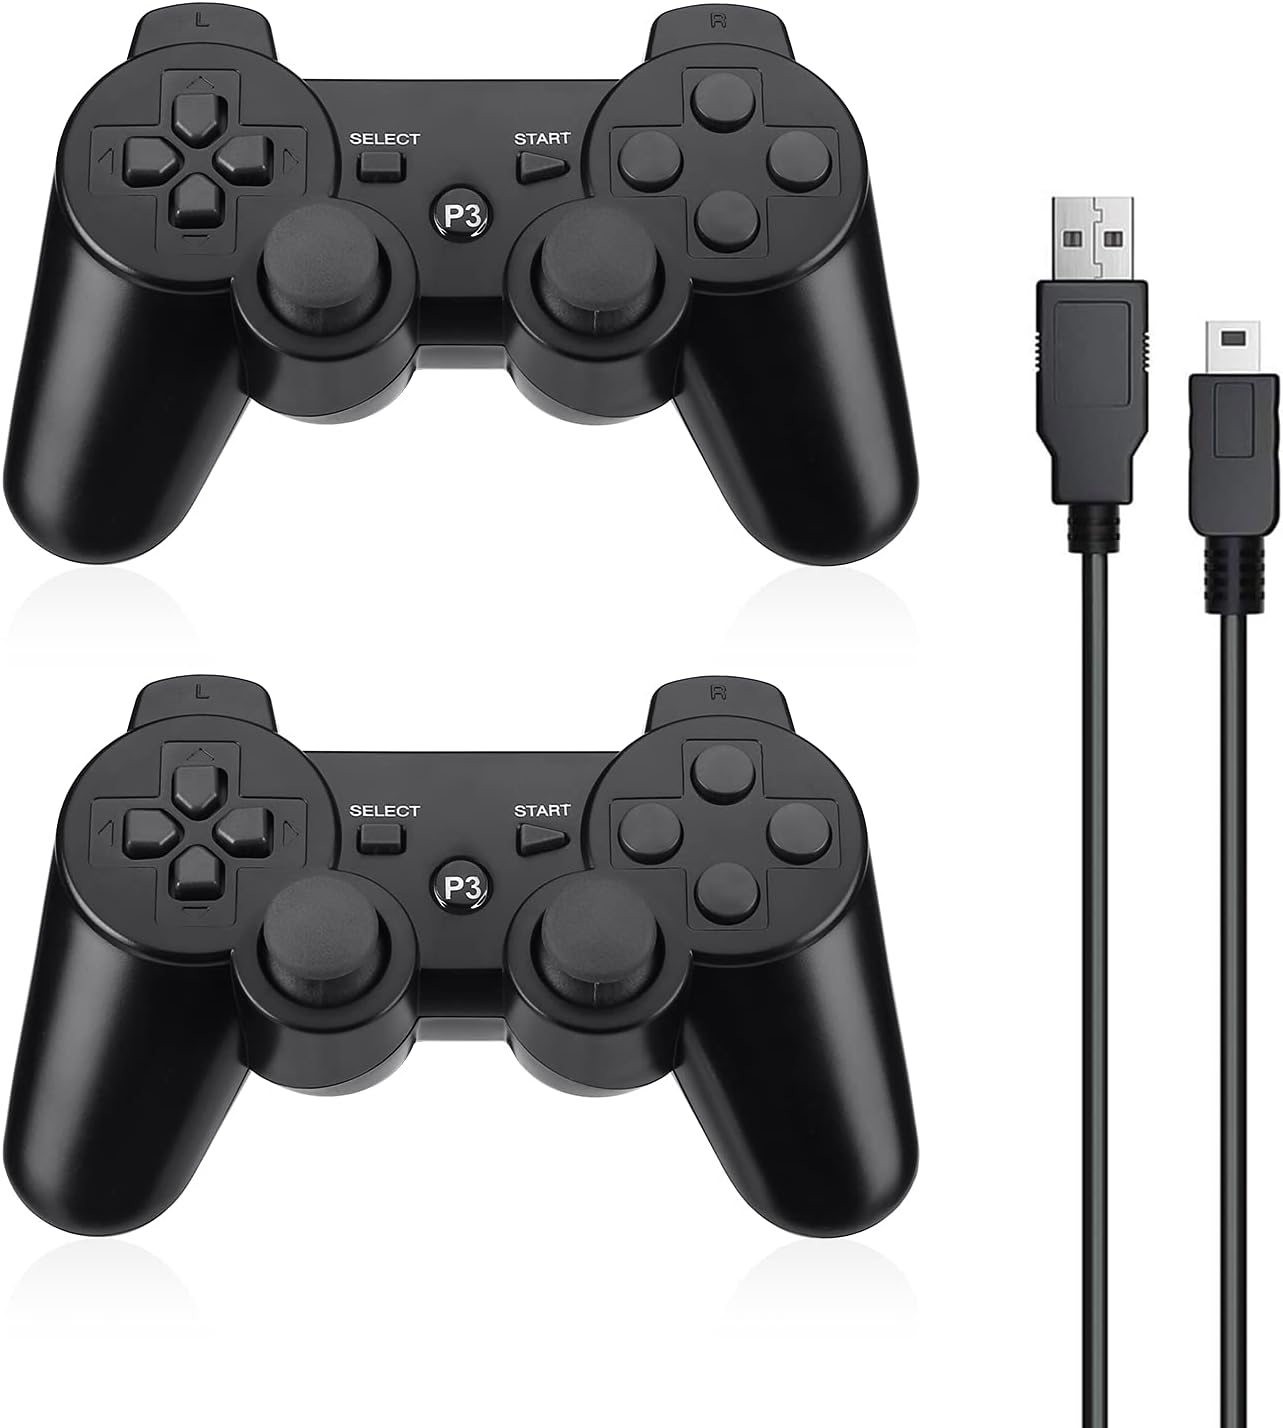 Powerextra Dual Wireless Controller For PC, PS3, 2 Pieces - Black